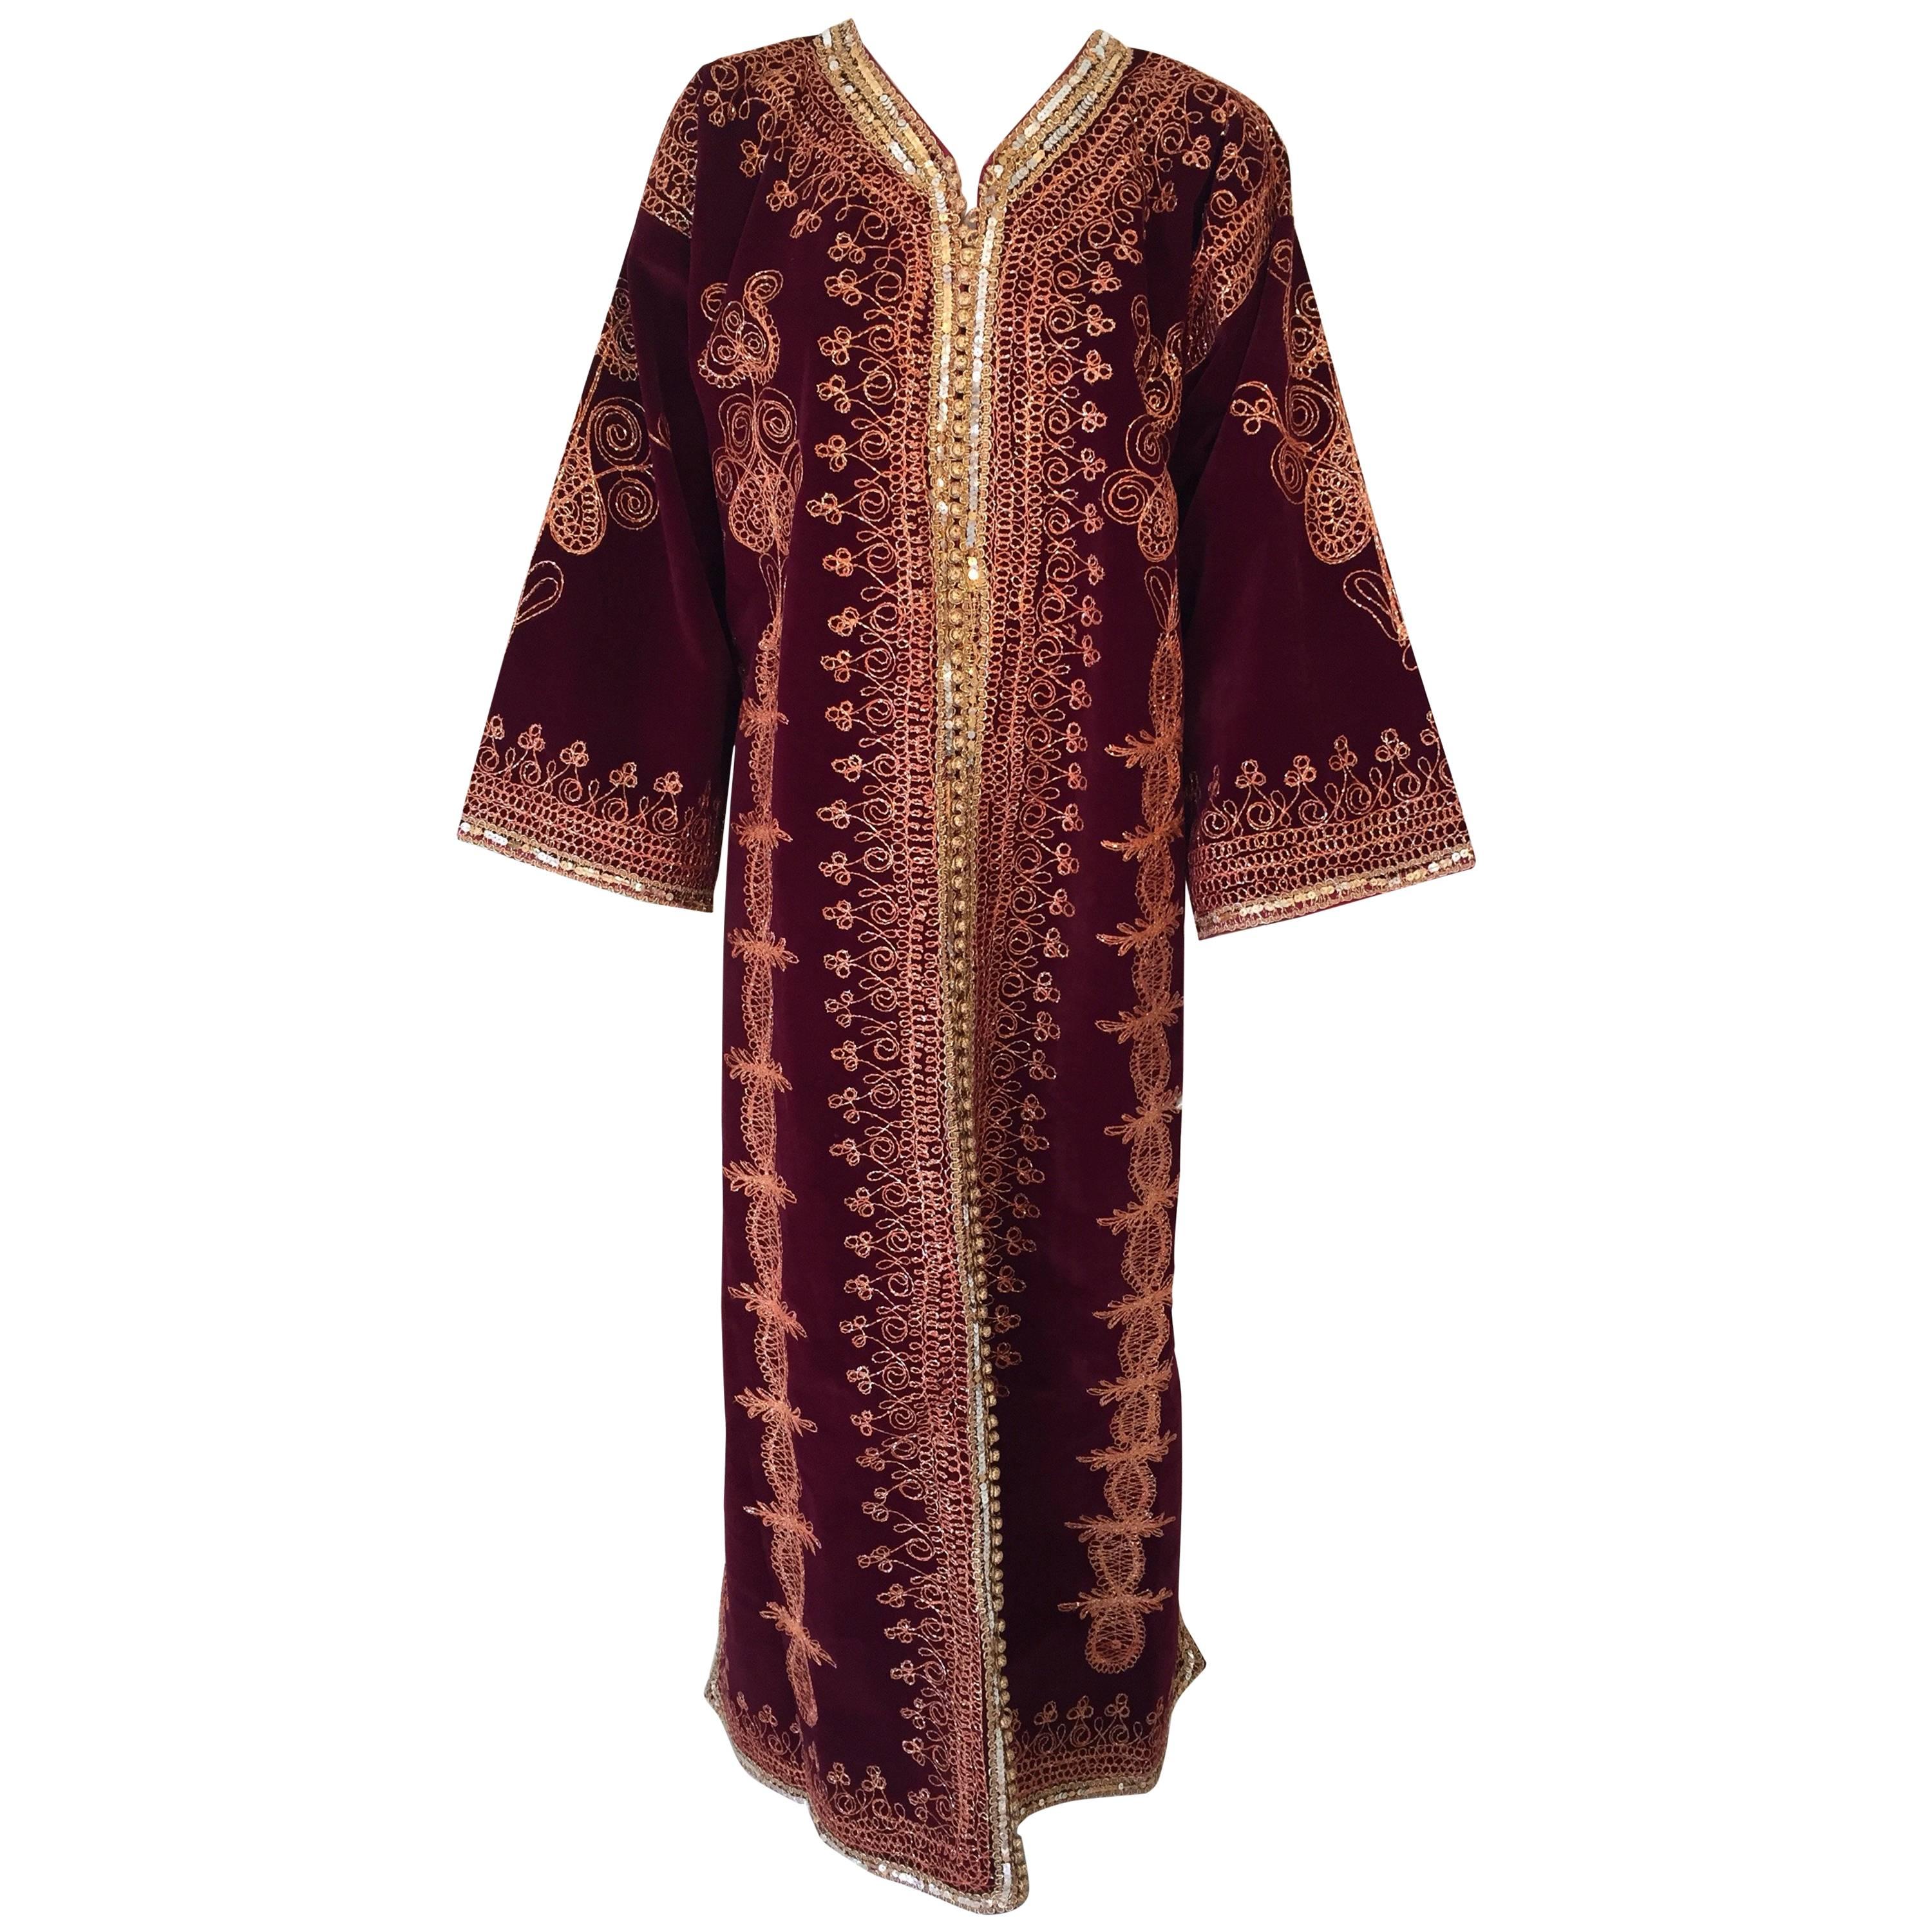 Moroccan Caftan Maroon Velvet Embroidered with Gold Kaftan, circa 1970